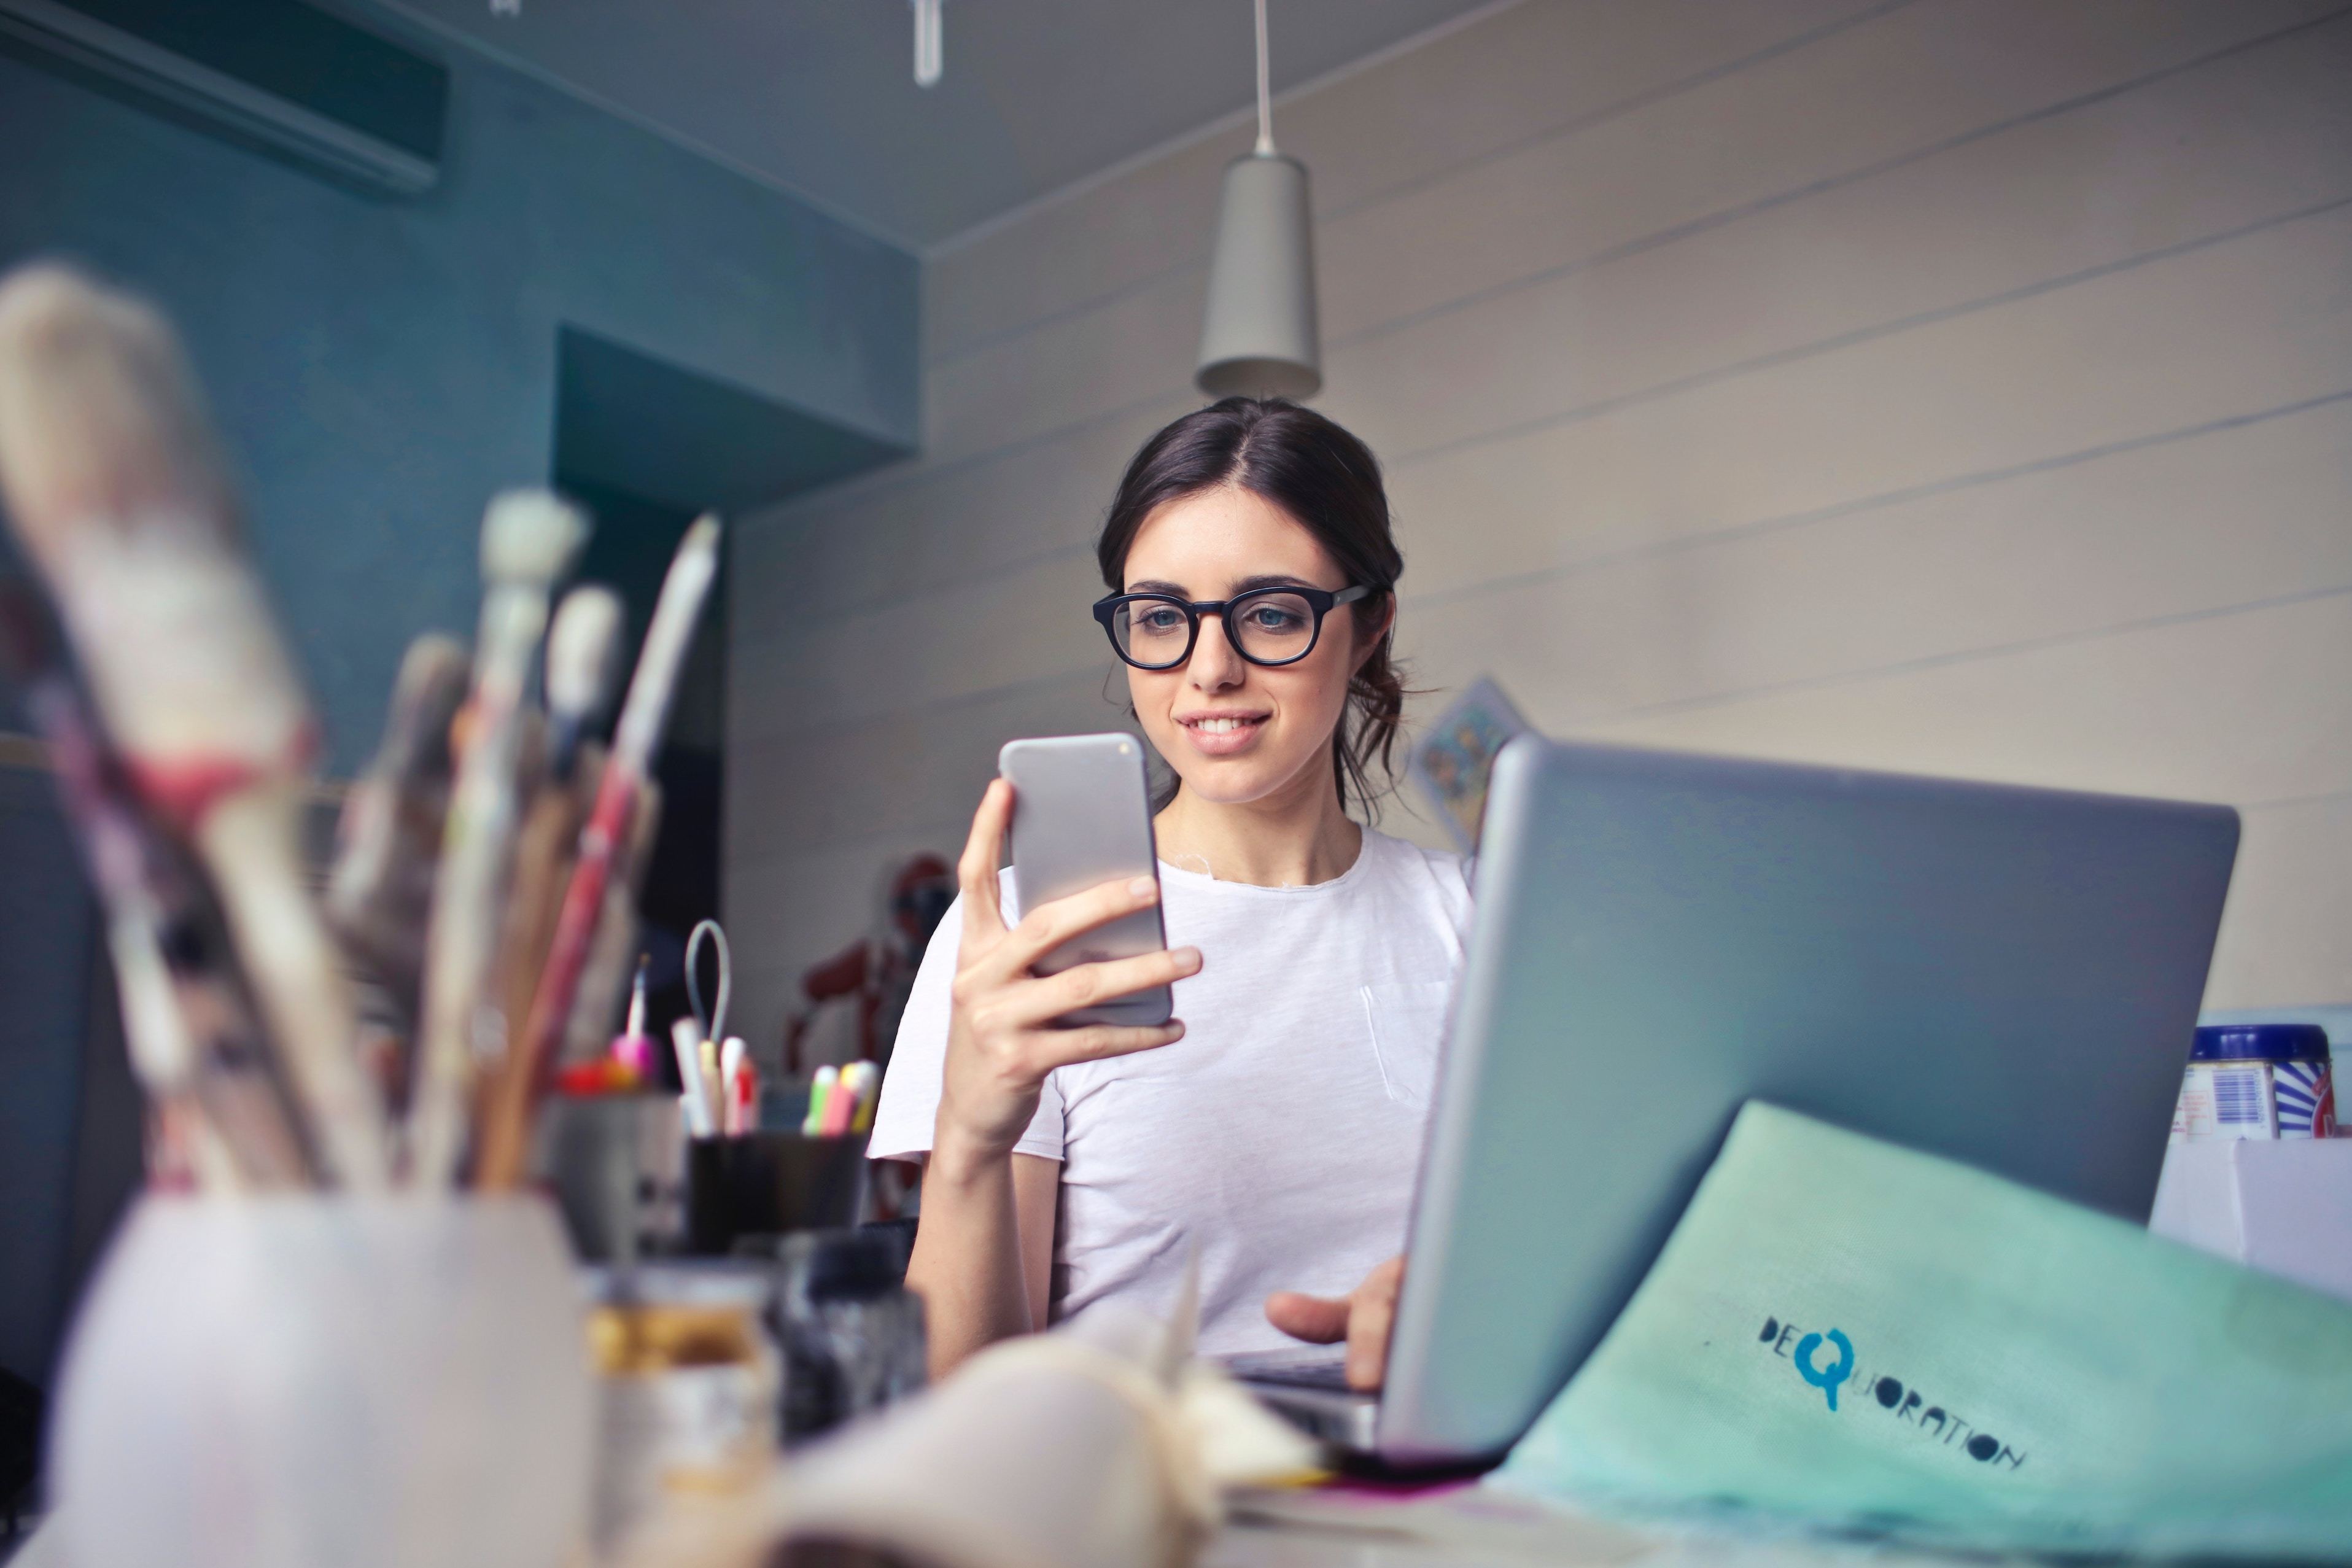 Woman at desk holding up smartphone